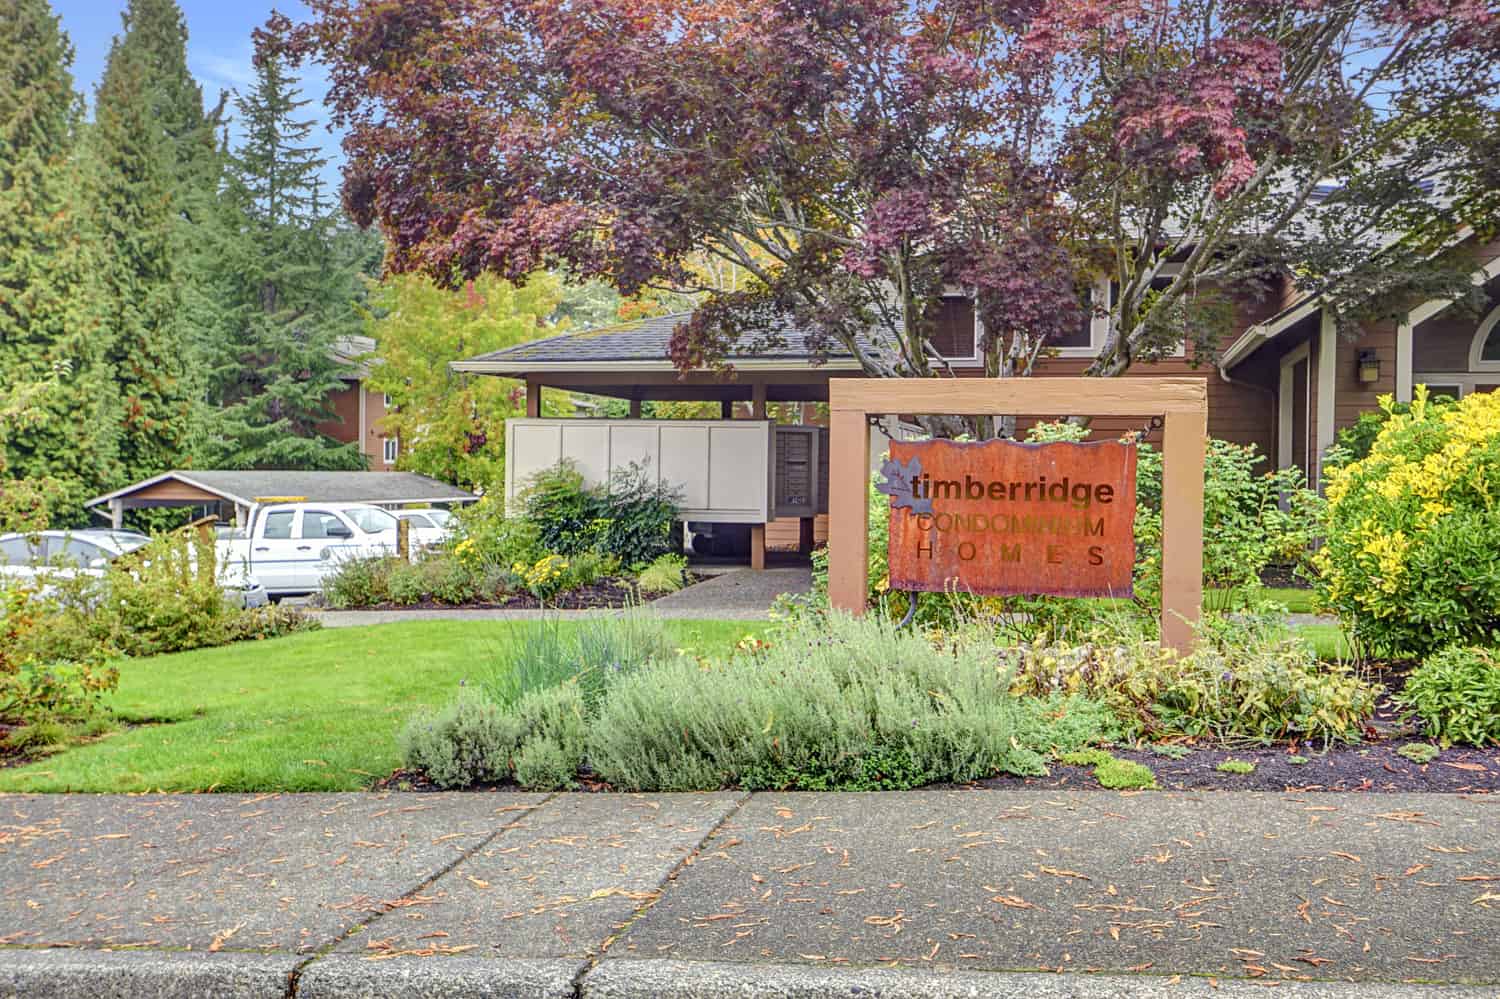 PRISTINE RESORT STYLE CONDO LIVING IN THE HEART OF WOODINVILLE